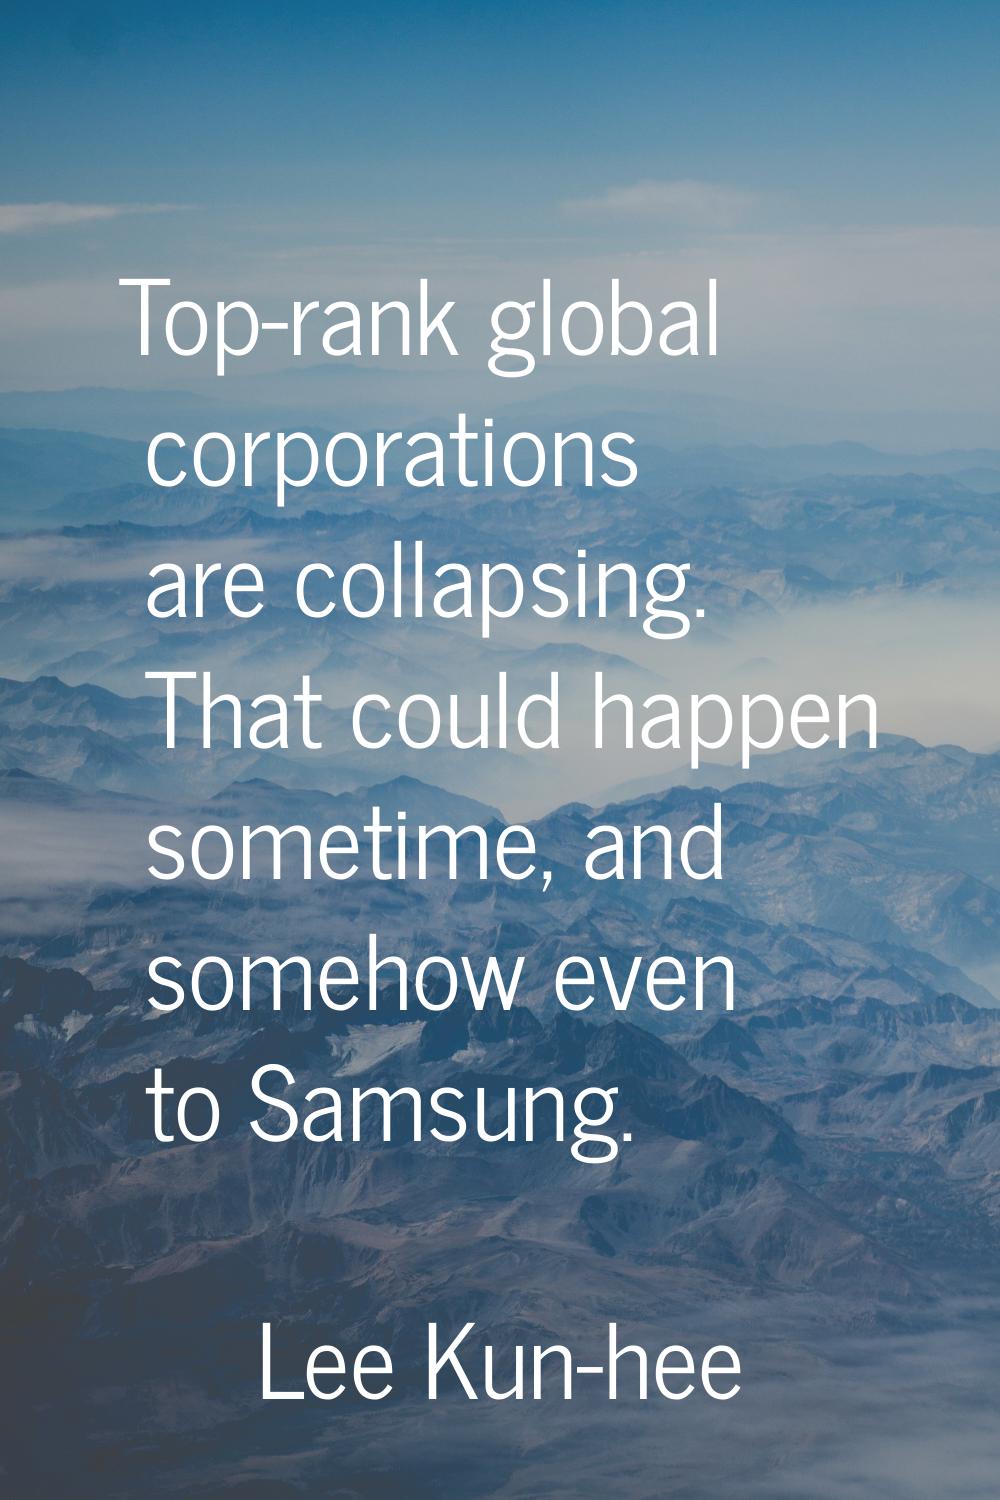 Top-rank global corporations are collapsing. That could happen sometime, and somehow even to Samsun